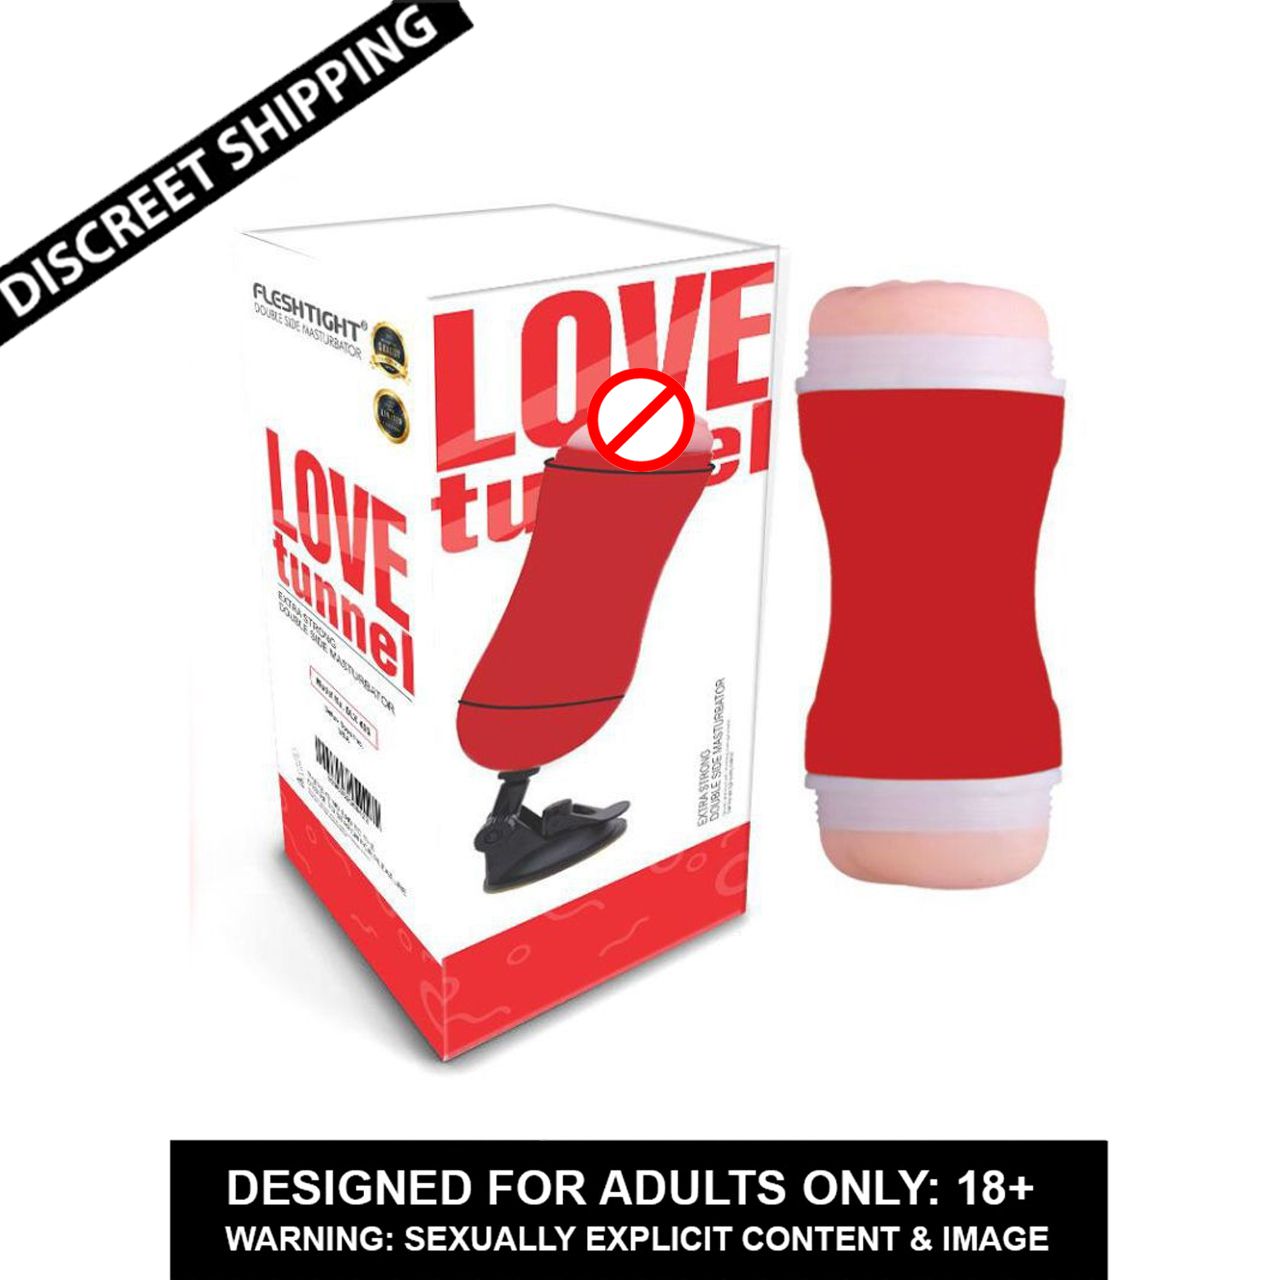 Love Tunnel PURE PASSION IMPORTED SEX TOYS INDIA FOR MEN: Buy Love Tunnel PURE  PASSION IMPORTED SEX TOYS INDIA FOR MEN at Best Prices in India - Snapdeal